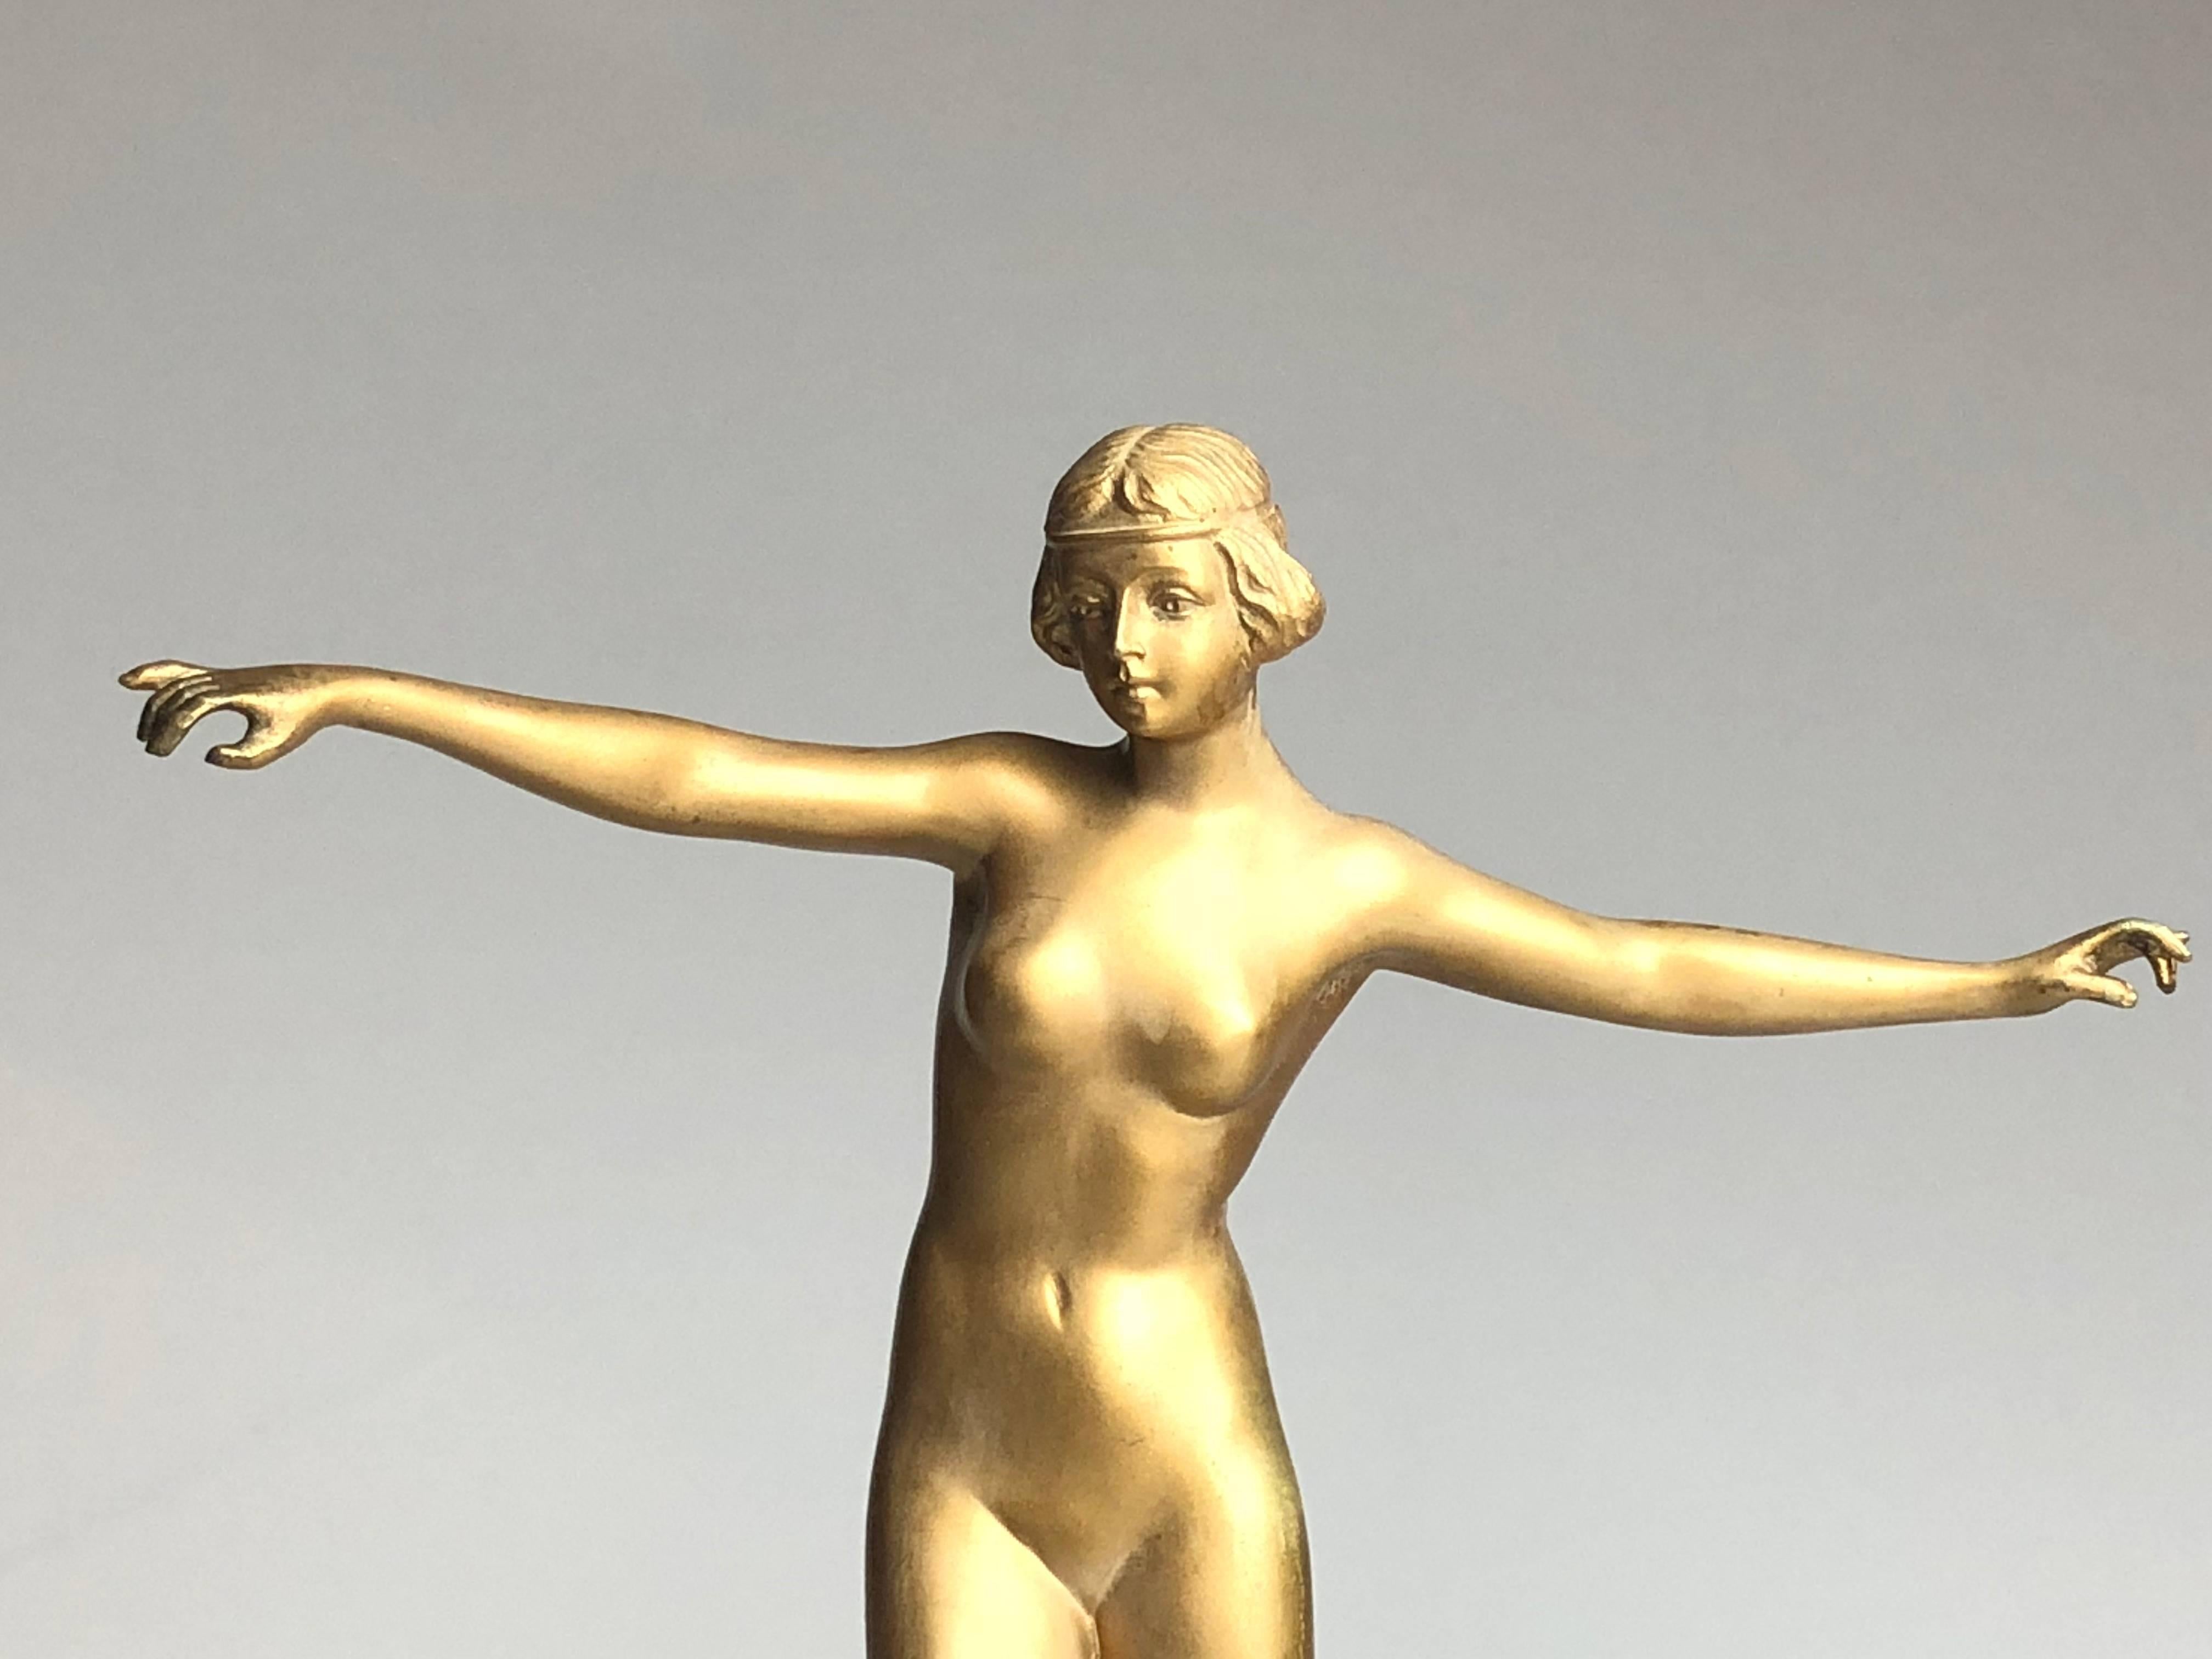 20th Century Early 20th Art Deco gilded bronze Sculpture of a Female Nude by Schmidt Hofer